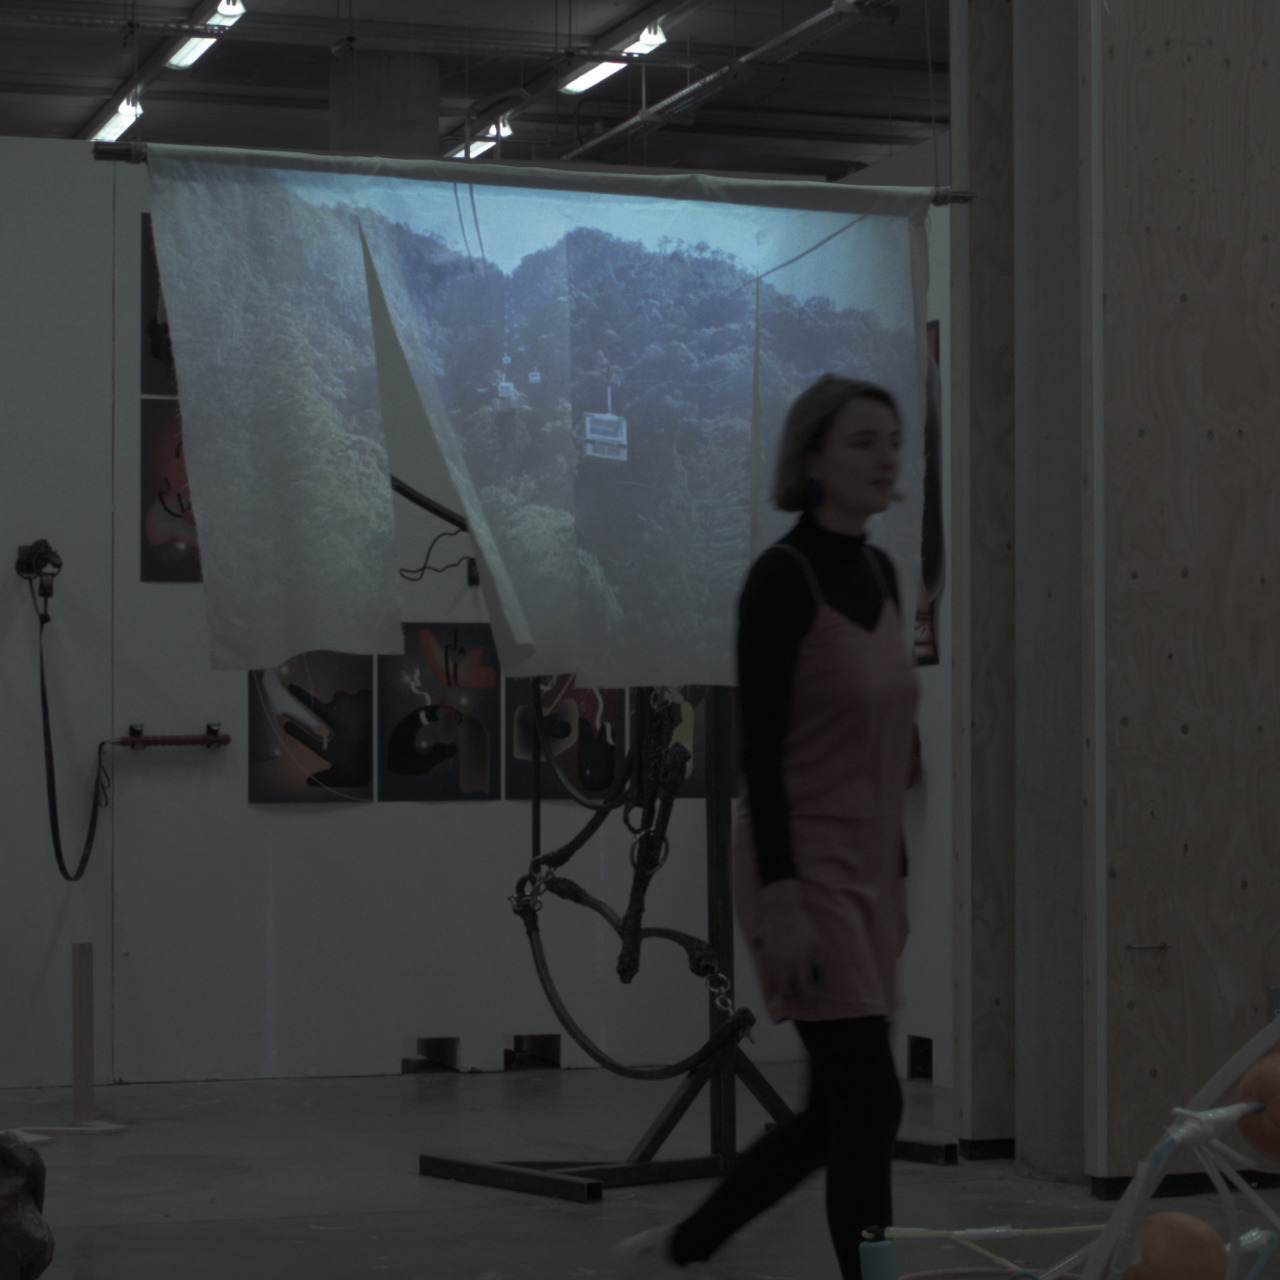 Passers By, 2016
Installation view of the open studio at Central Saint Martins, UAL.